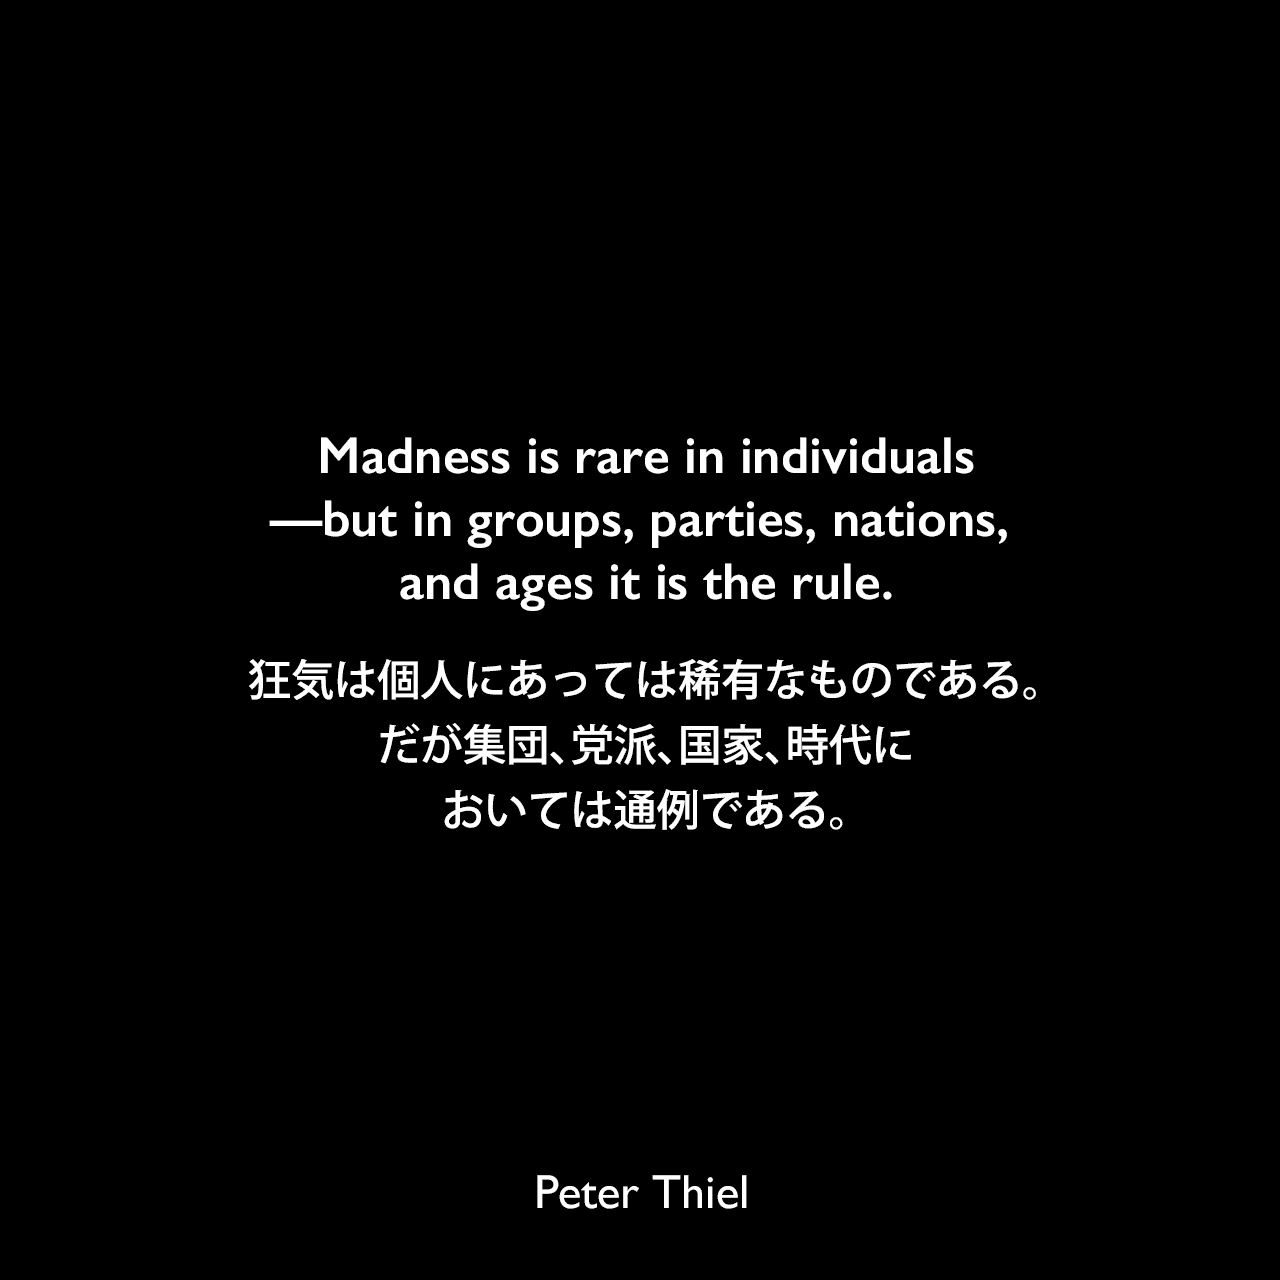 Madness is rare in individuals—but in groups, parties, nations, and ages it is the rule.狂気は個人にあっては稀有なものである。だが集団、党派、国家、時代においては通例である。- ピーター・ティールの本「Zero to One」よりニーチェの言葉としてPeter Thiel